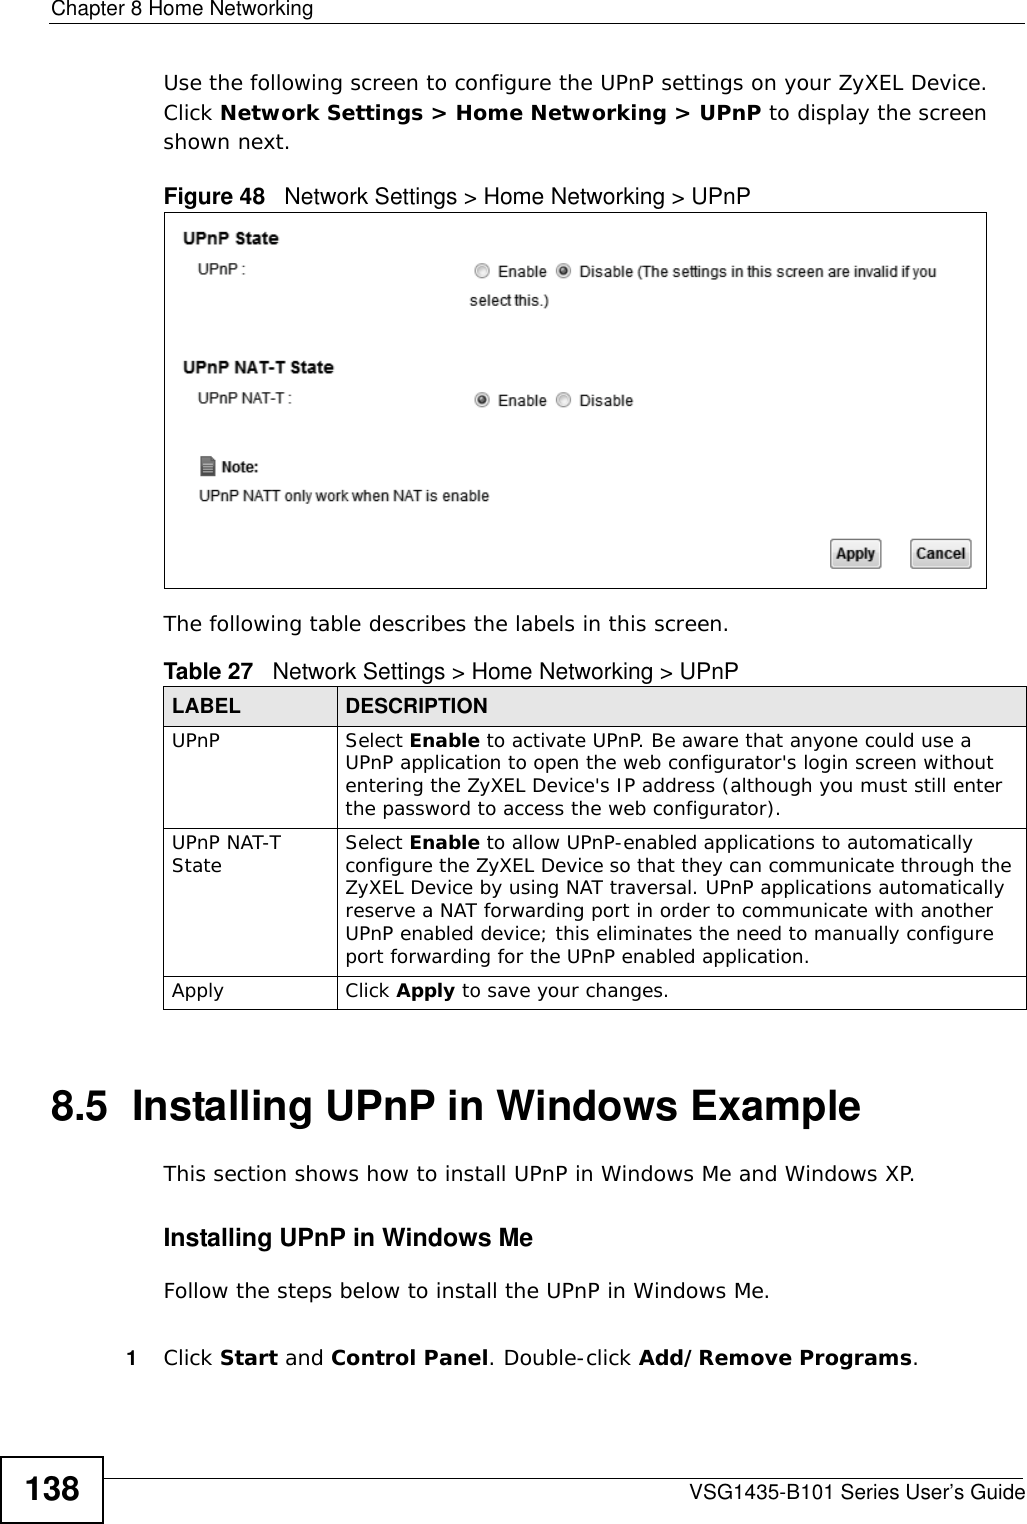 Chapter 8 Home NetworkingVSG1435-B101 Series User’s Guide138Use the following screen to configure the UPnP settings on your ZyXEL Device. Click Network Settings &gt; Home Networking &gt; UPnP to display the screen shown next.Figure 48   Network Settings &gt; Home Networking &gt; UPnPThe following table describes the labels in this screen.8.5  Installing UPnP in Windows ExampleThis section shows how to install UPnP in Windows Me and Windows XP. Installing UPnP in Windows MeFollow the steps below to install the UPnP in Windows Me. 1Click Start and Control Panel. Double-click Add/Remove Programs.Table 27   Network Settings &gt; Home Networking &gt; UPnPLABEL DESCRIPTIONUPnP Select Enable to activate UPnP. Be aware that anyone could use a UPnP application to open the web configurator&apos;s login screen without entering the ZyXEL Device&apos;s IP address (although you must still enter the password to access the web configurator).UPnP NAT-T State Select Enable to allow UPnP-enabled applications to automatically configure the ZyXEL Device so that they can communicate through the ZyXEL Device by using NAT traversal. UPnP applications automatically reserve a NAT forwarding port in order to communicate with another UPnP enabled device; this eliminates the need to manually configure port forwarding for the UPnP enabled application. Apply Click Apply to save your changes.